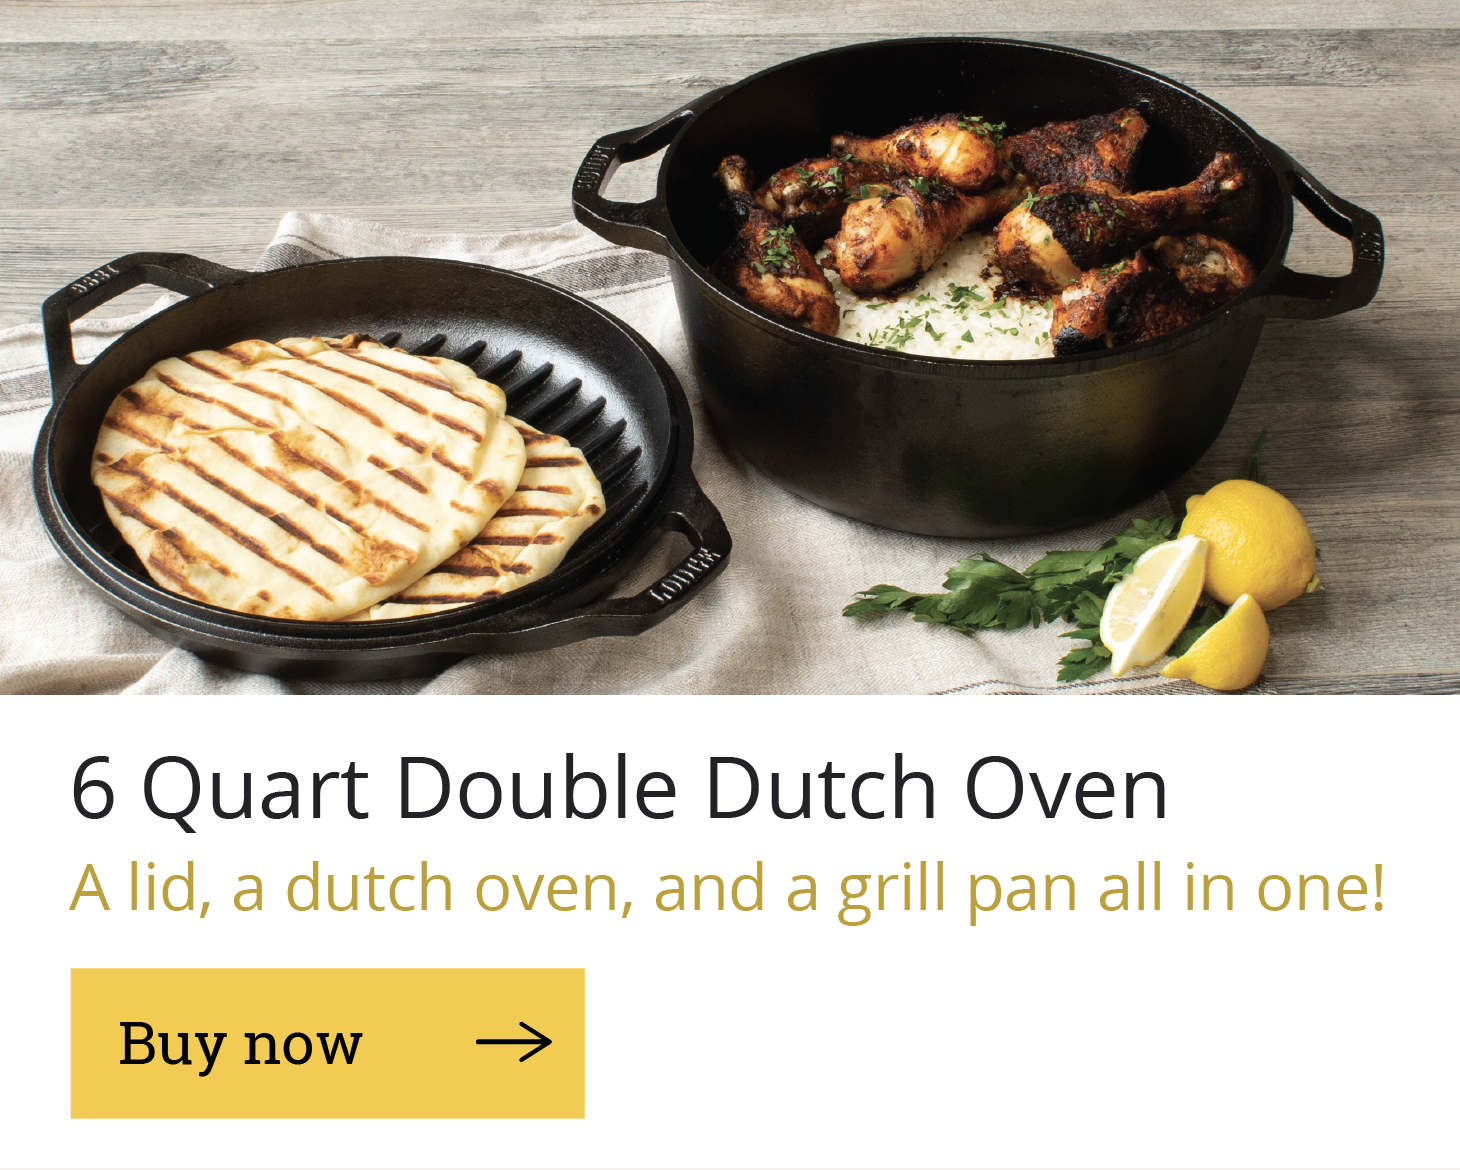 6 Quart Double Dutch Oven, A lid, a Dutch oven, and a grill pan all in one!